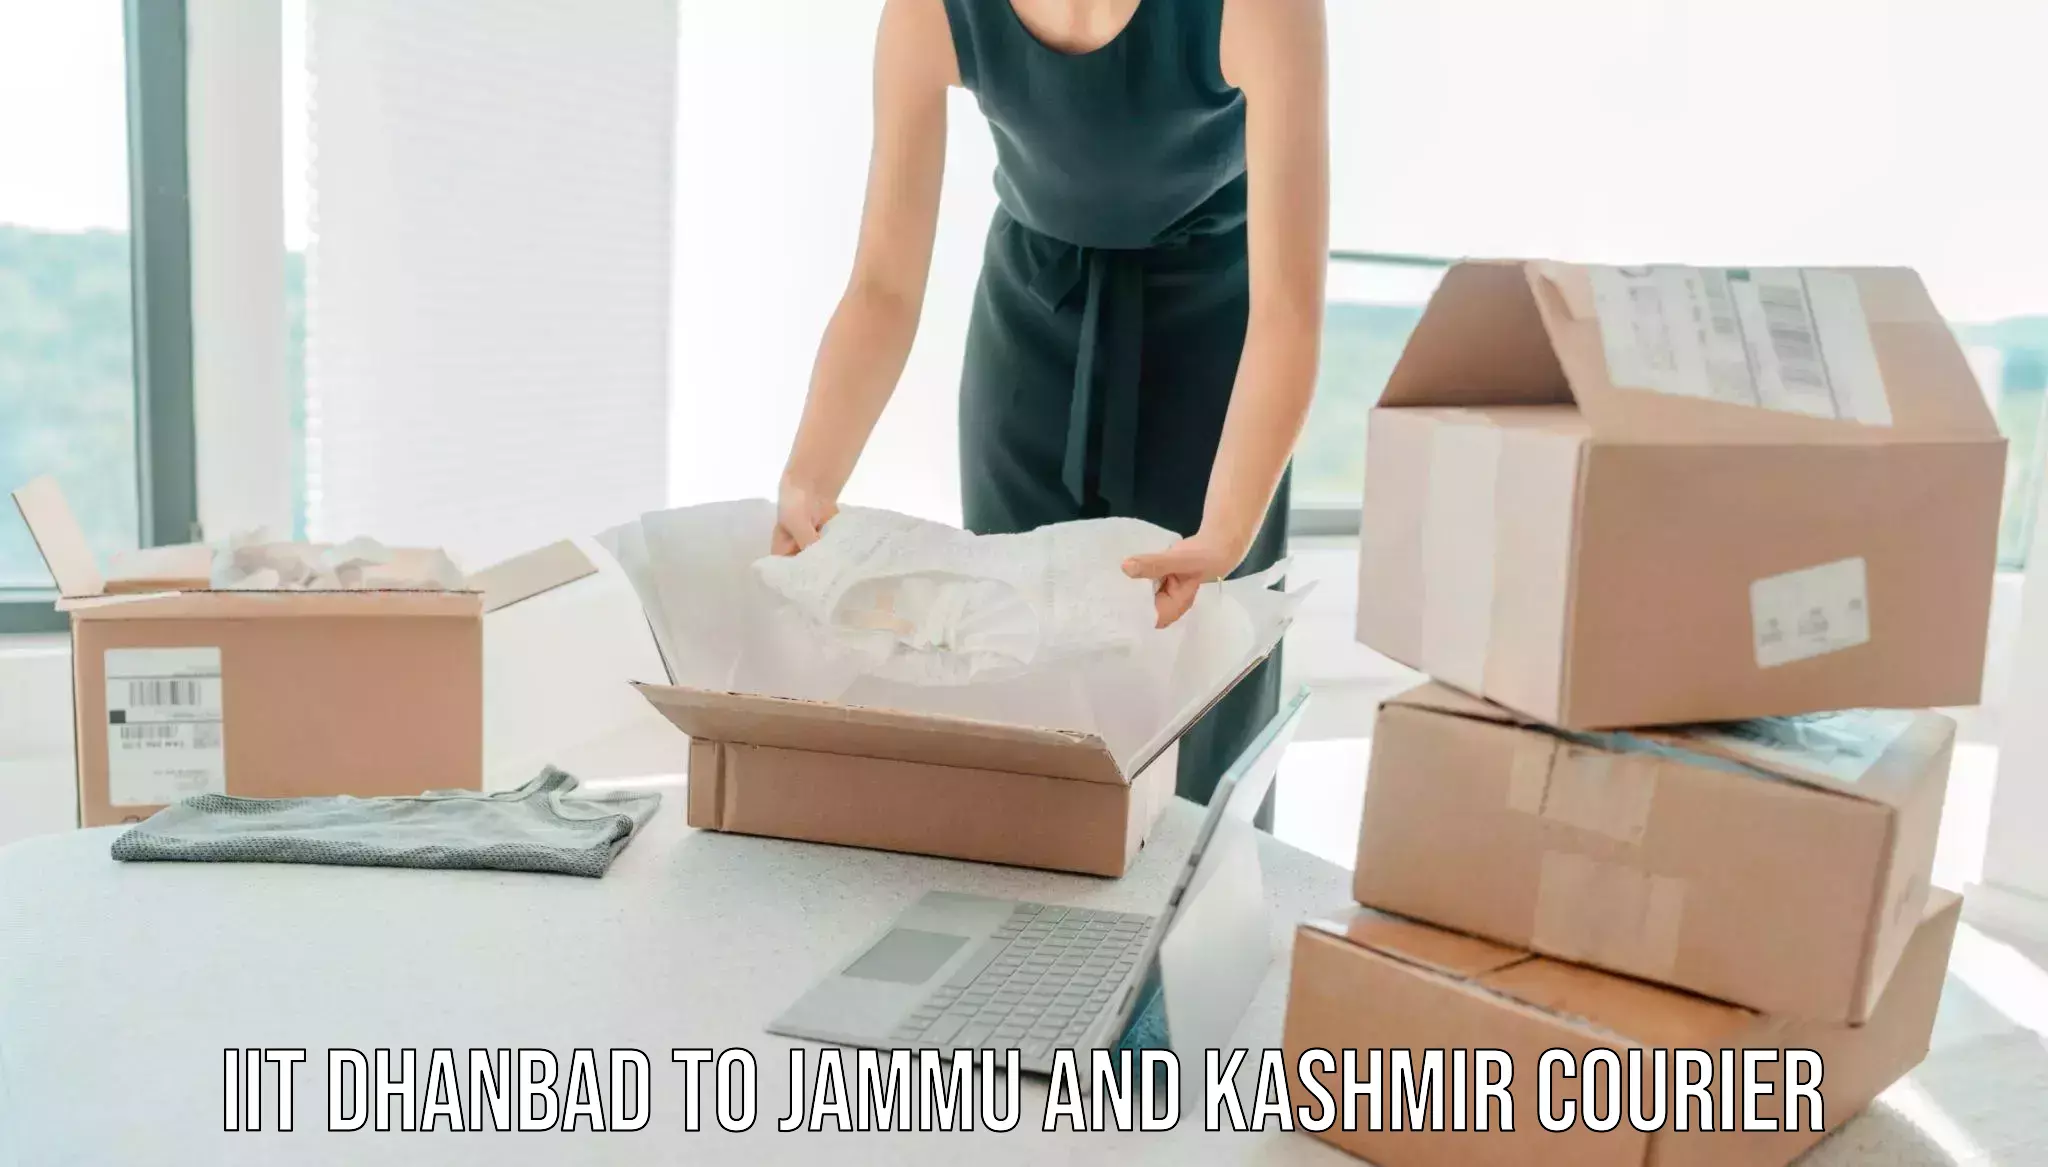 Furniture delivery service in IIT Dhanbad to Jammu and Kashmir